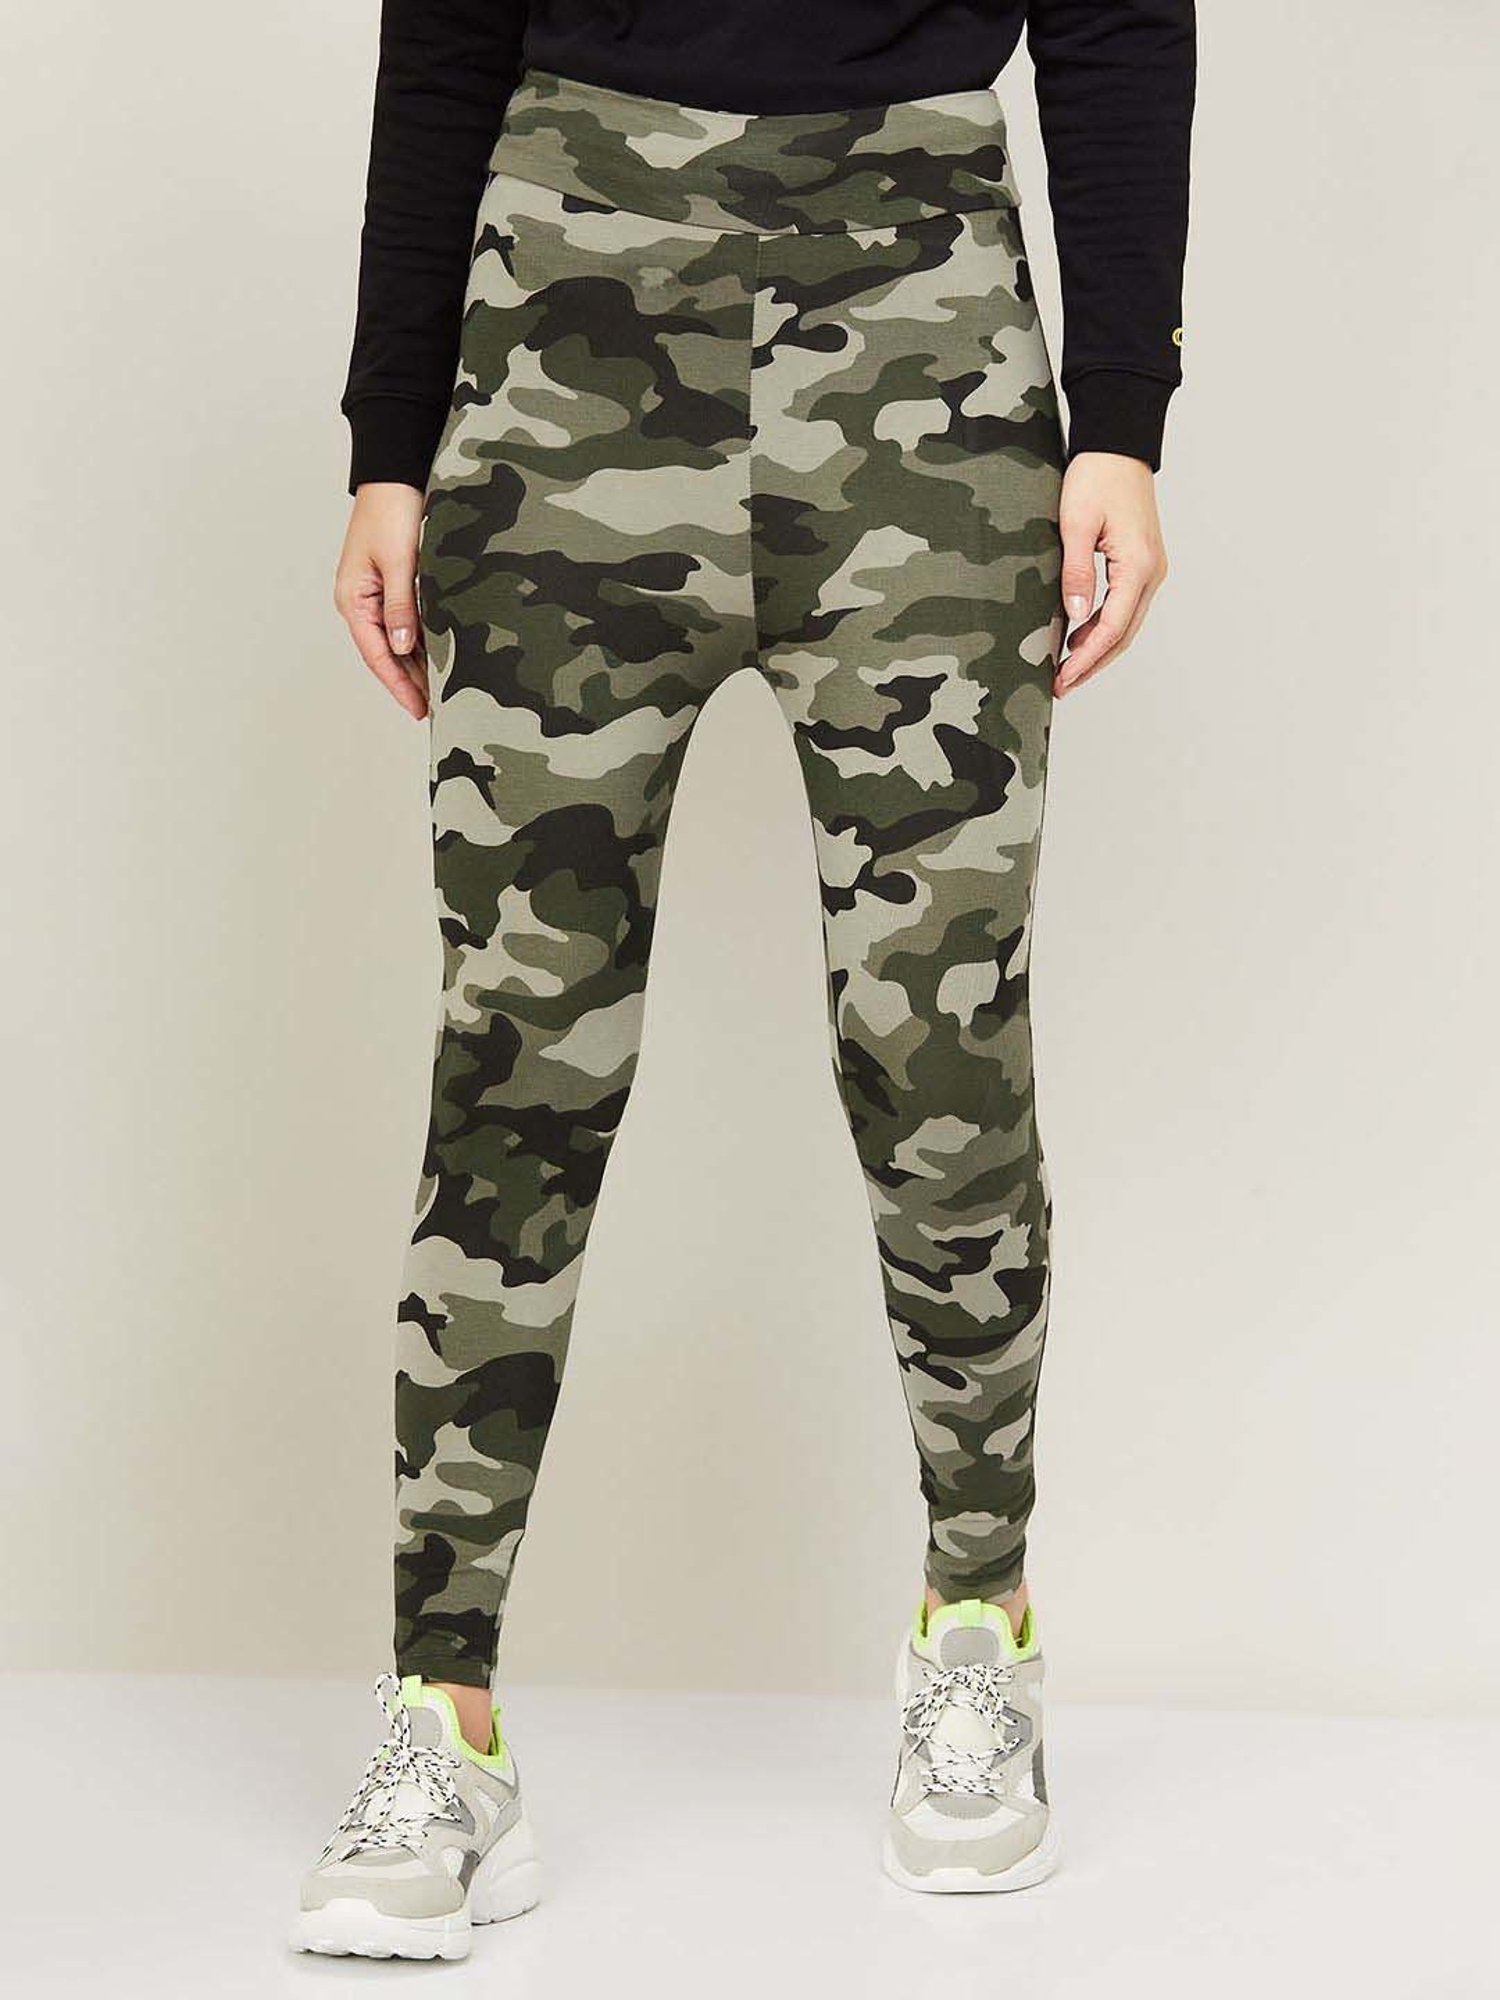 NOBERO Women's Navy Camouflage Sports Lowers | Joggers for Active Lifestyle  | Soft Feel Track Pant for Women - S : Amazon.in: Fashion